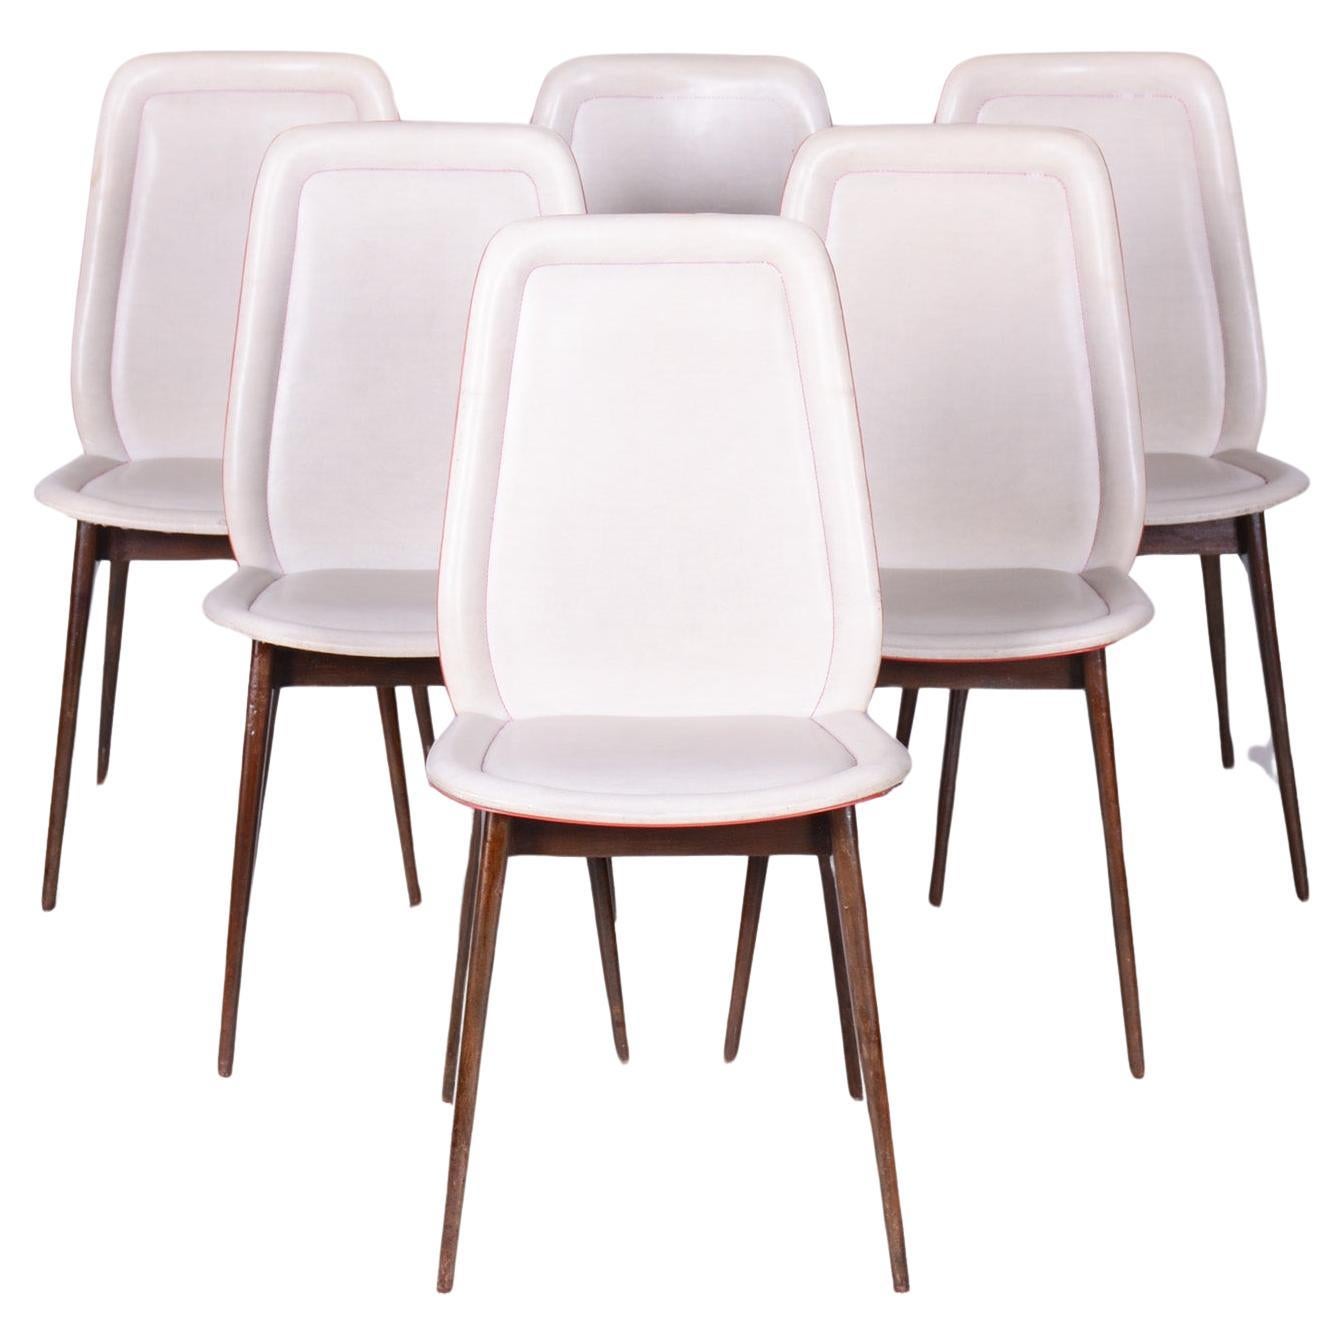 Six Original Art Deco Chairs, by Jules Leleu, Revived Polish, France, 1940s For Sale